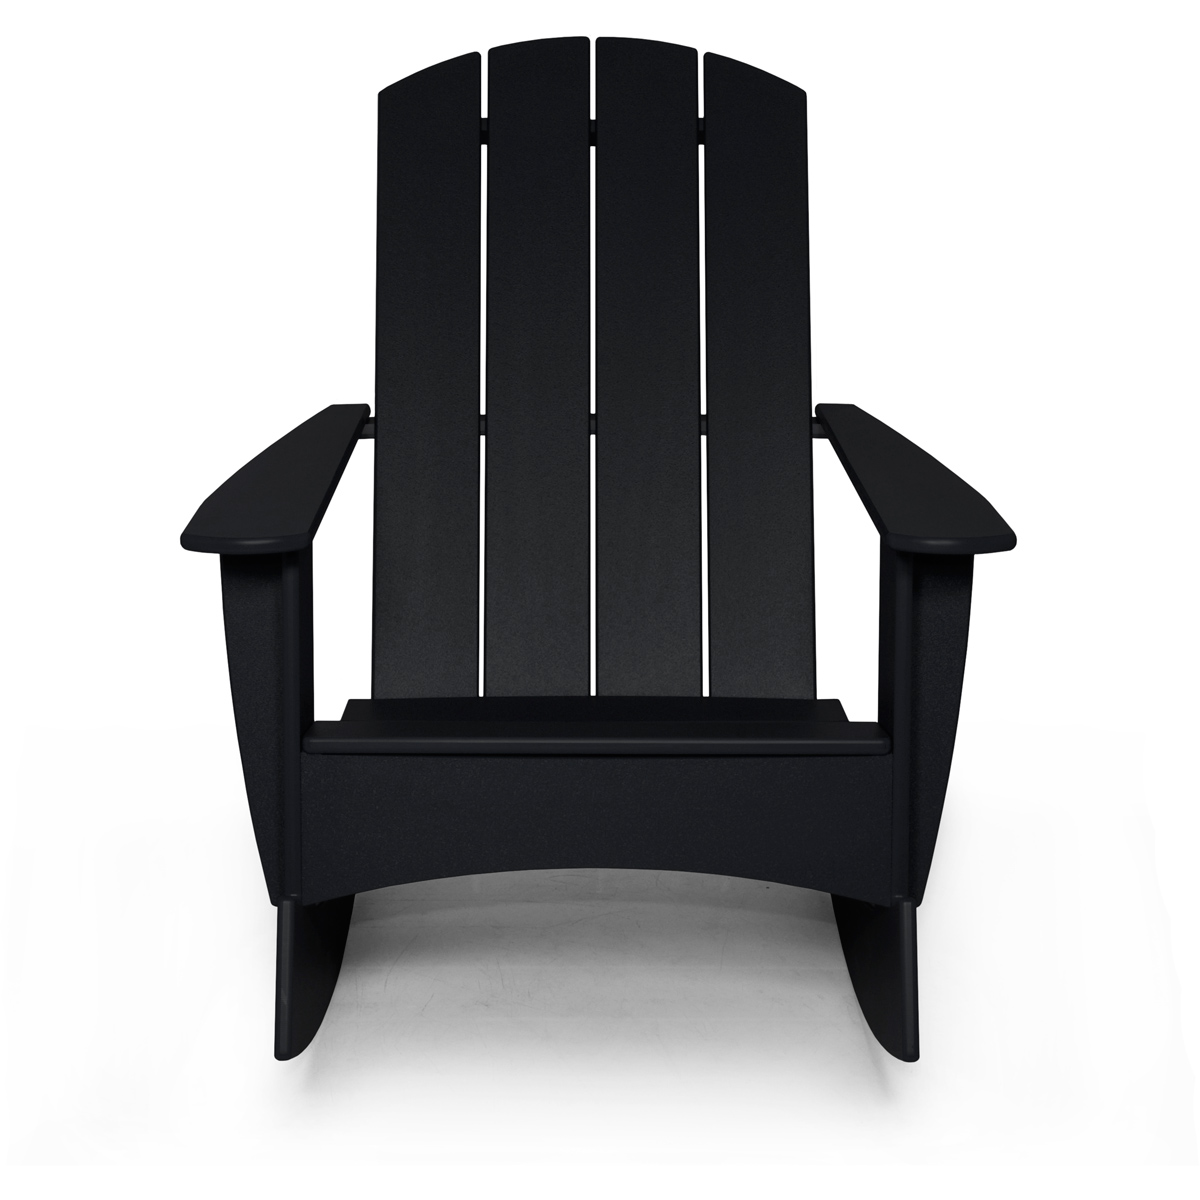 14 Adirondack Chair Silhouette Vector Images Adirondack Chair